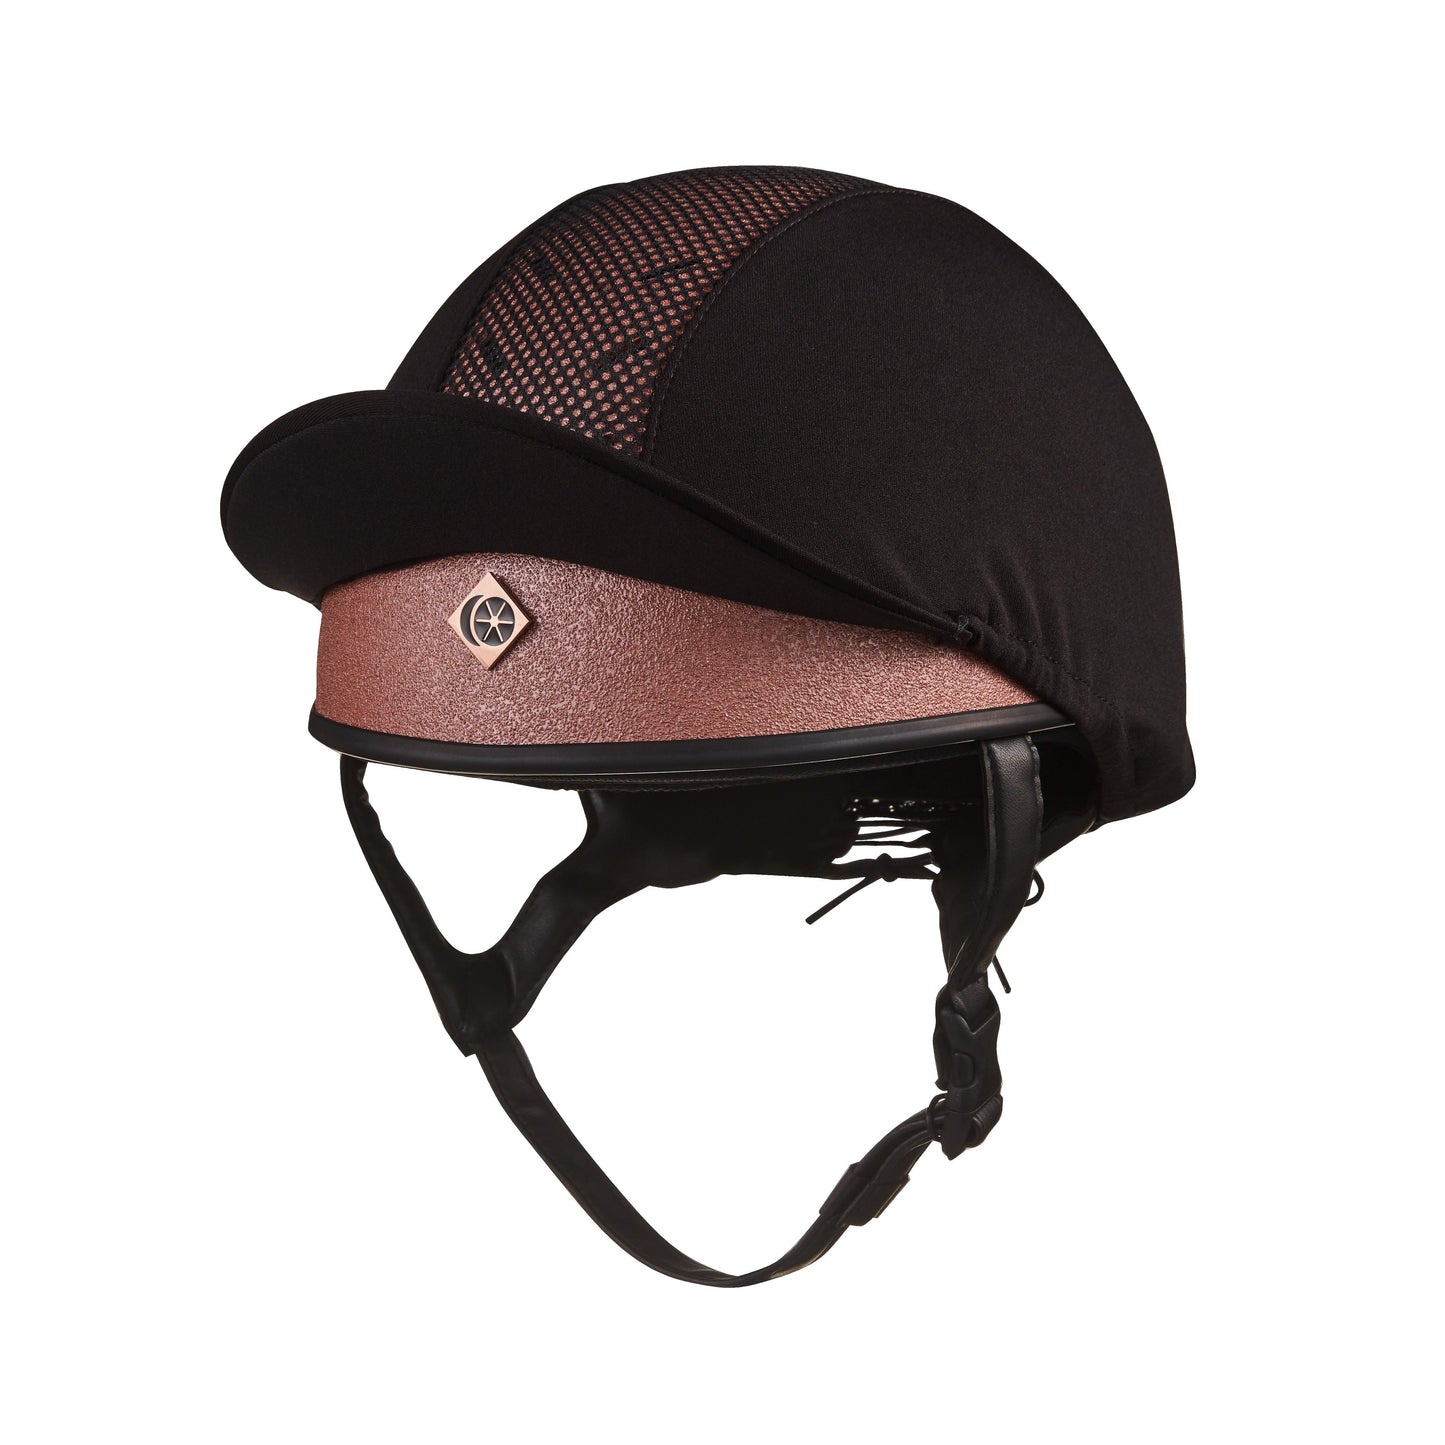 KEP equestrian helmet, black and rose gold, with mesh and chinstrap.